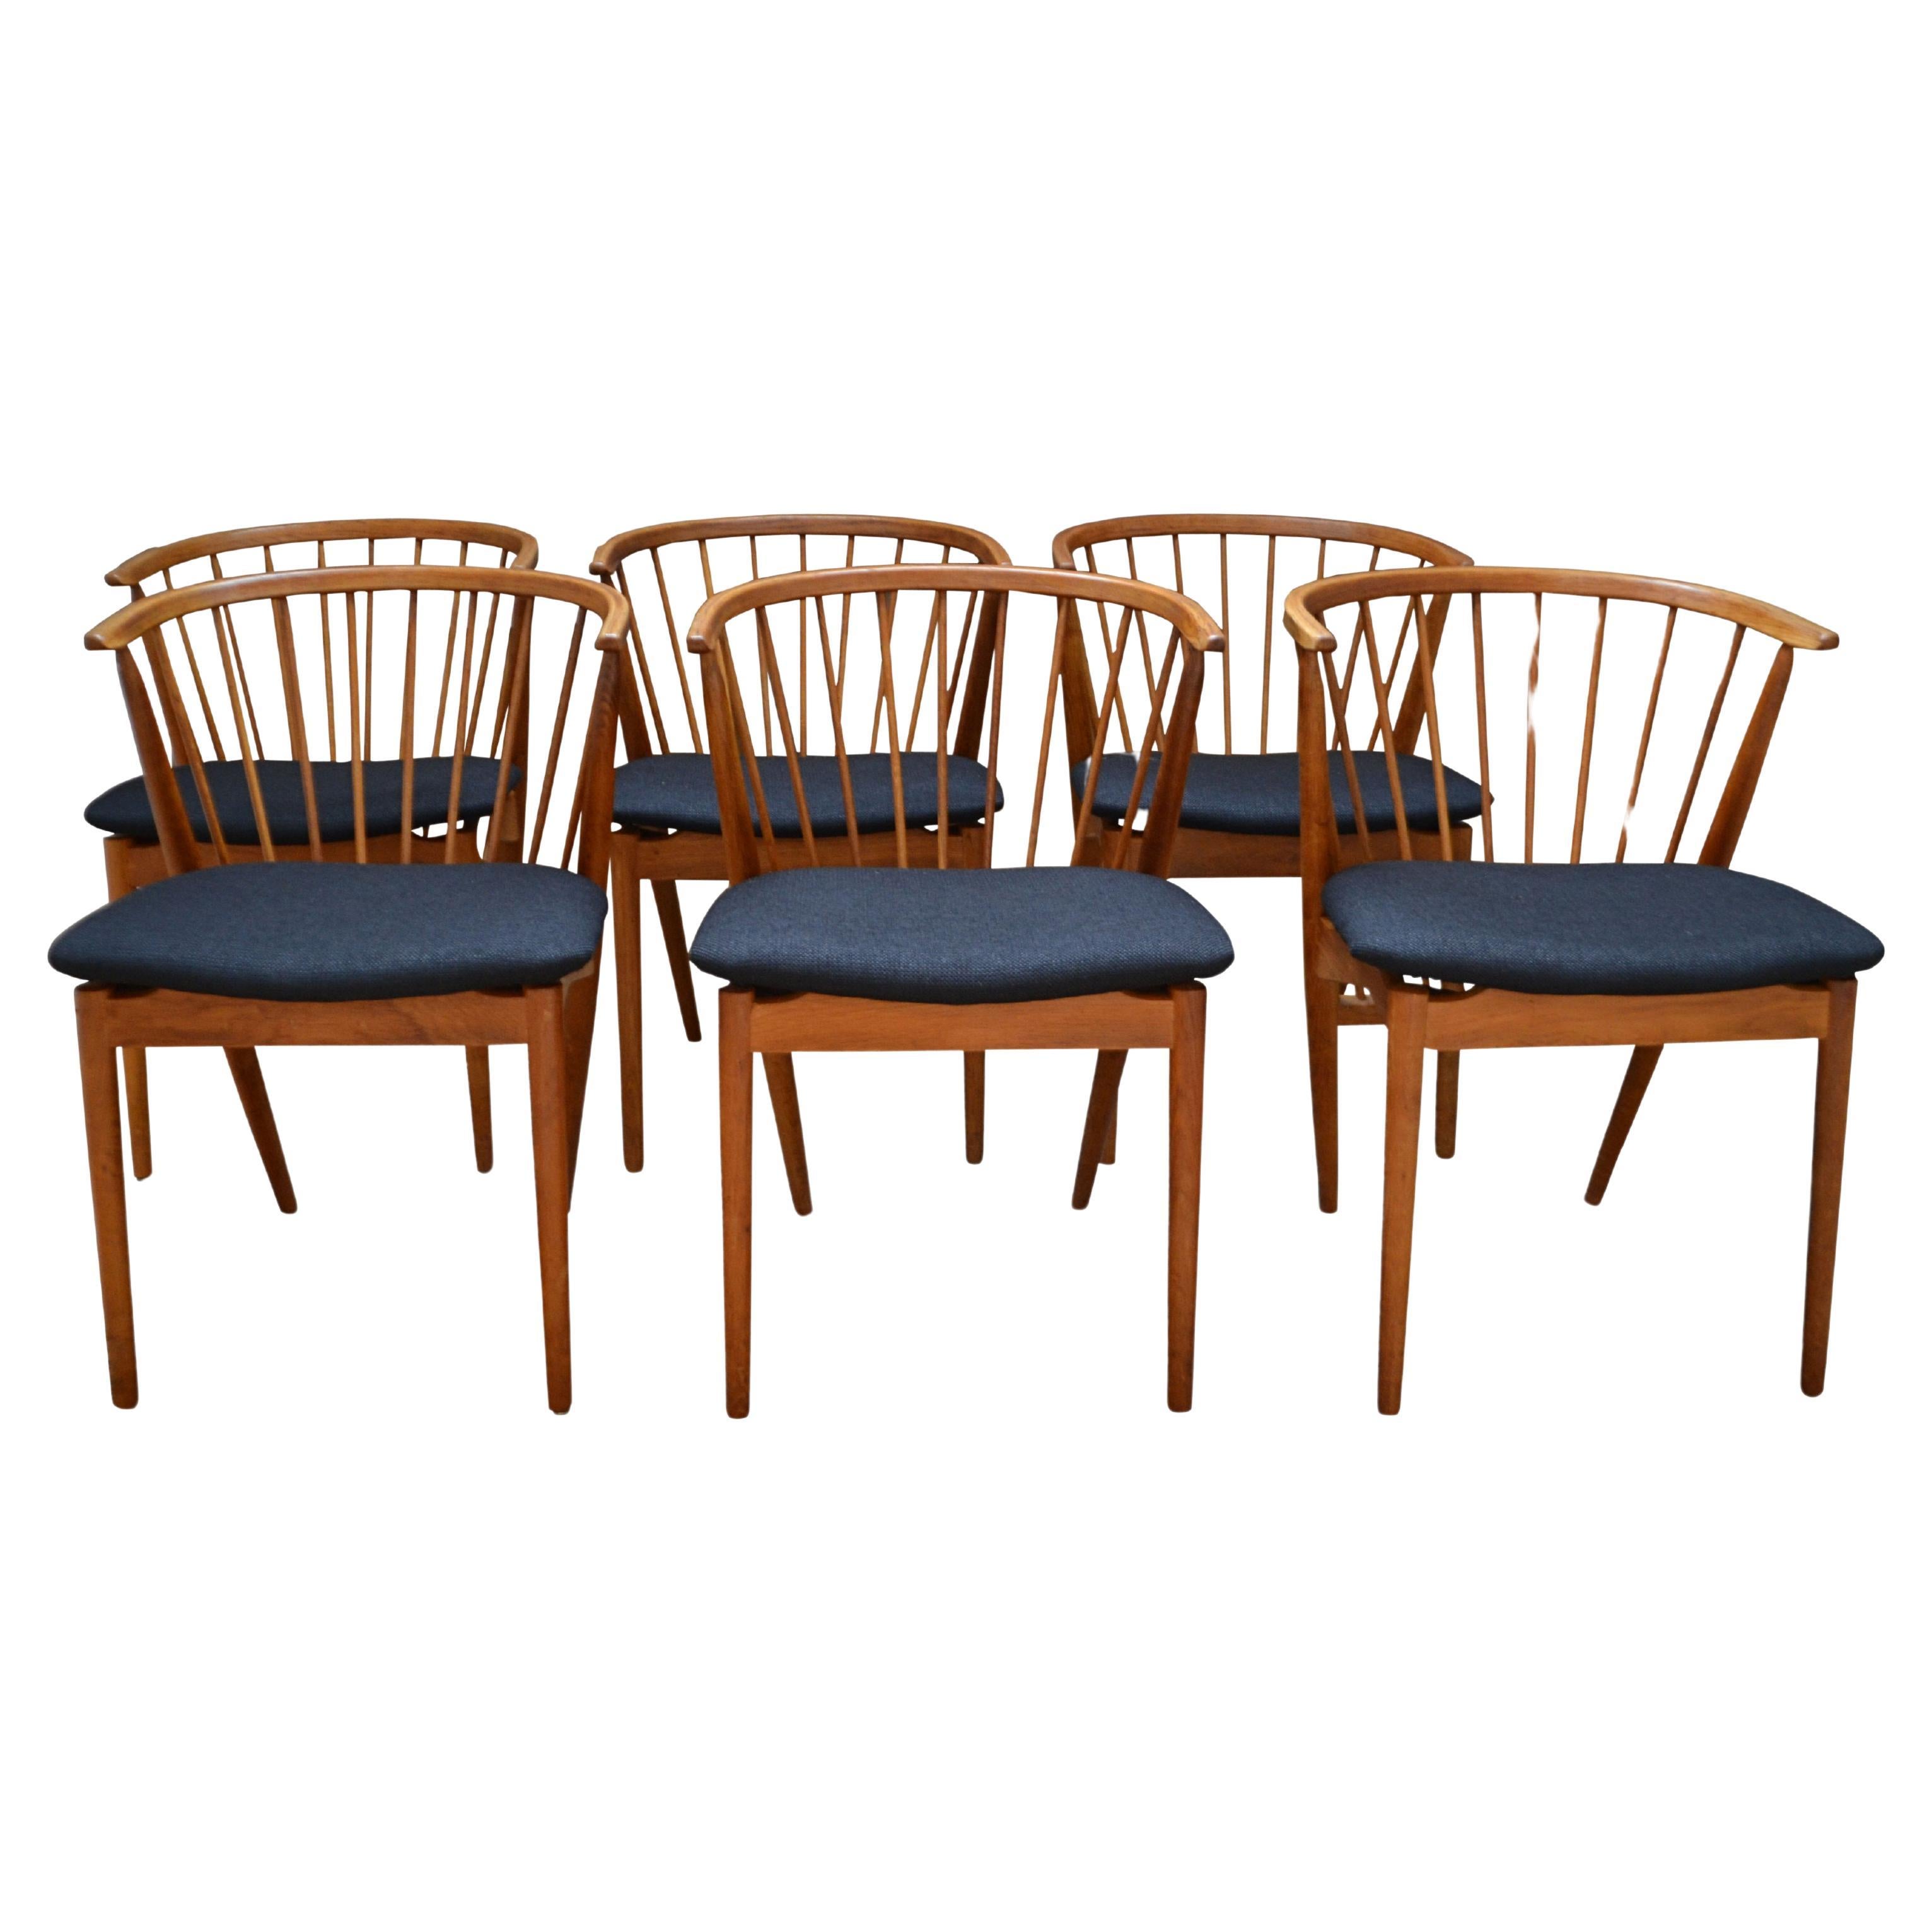 This unique set of 6 vintage Danish design oa dining chairs were designed by Helge Sibast in 1953 for Sibast Møbler. Typical for this no.6 model is the beautifuly shaped backrest. Alle seatings have a new dark grey color fabric. A stunning set, a